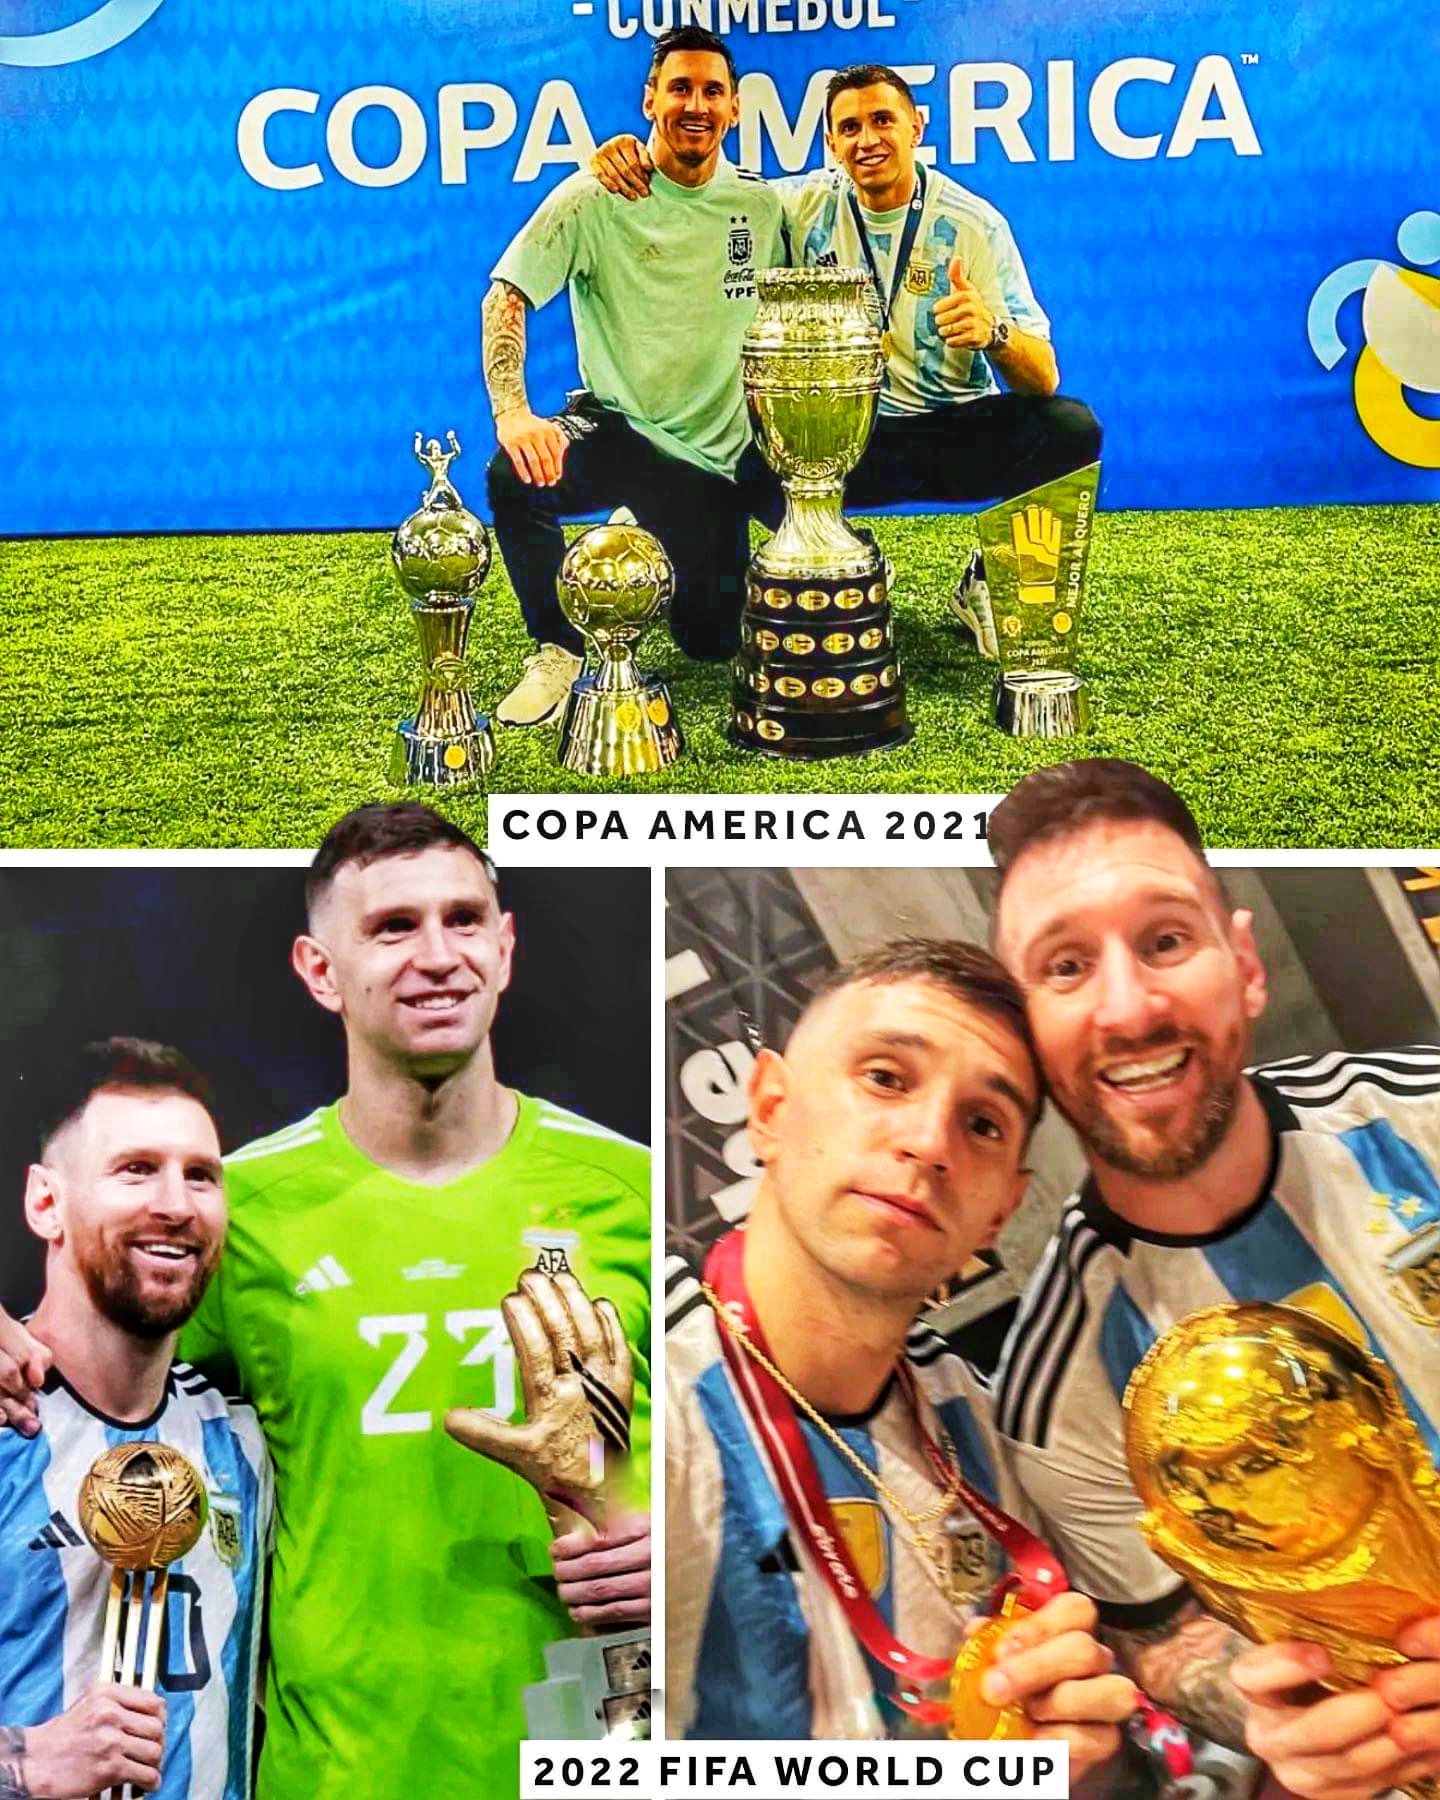 FIFA World Cup Stats on X: "10 yrs ago,when Lionel Messi scored his 91st  goal of 2012. Emiliano Martinez was playing for Oxford United in England's  4th division. They've both been Argentina's